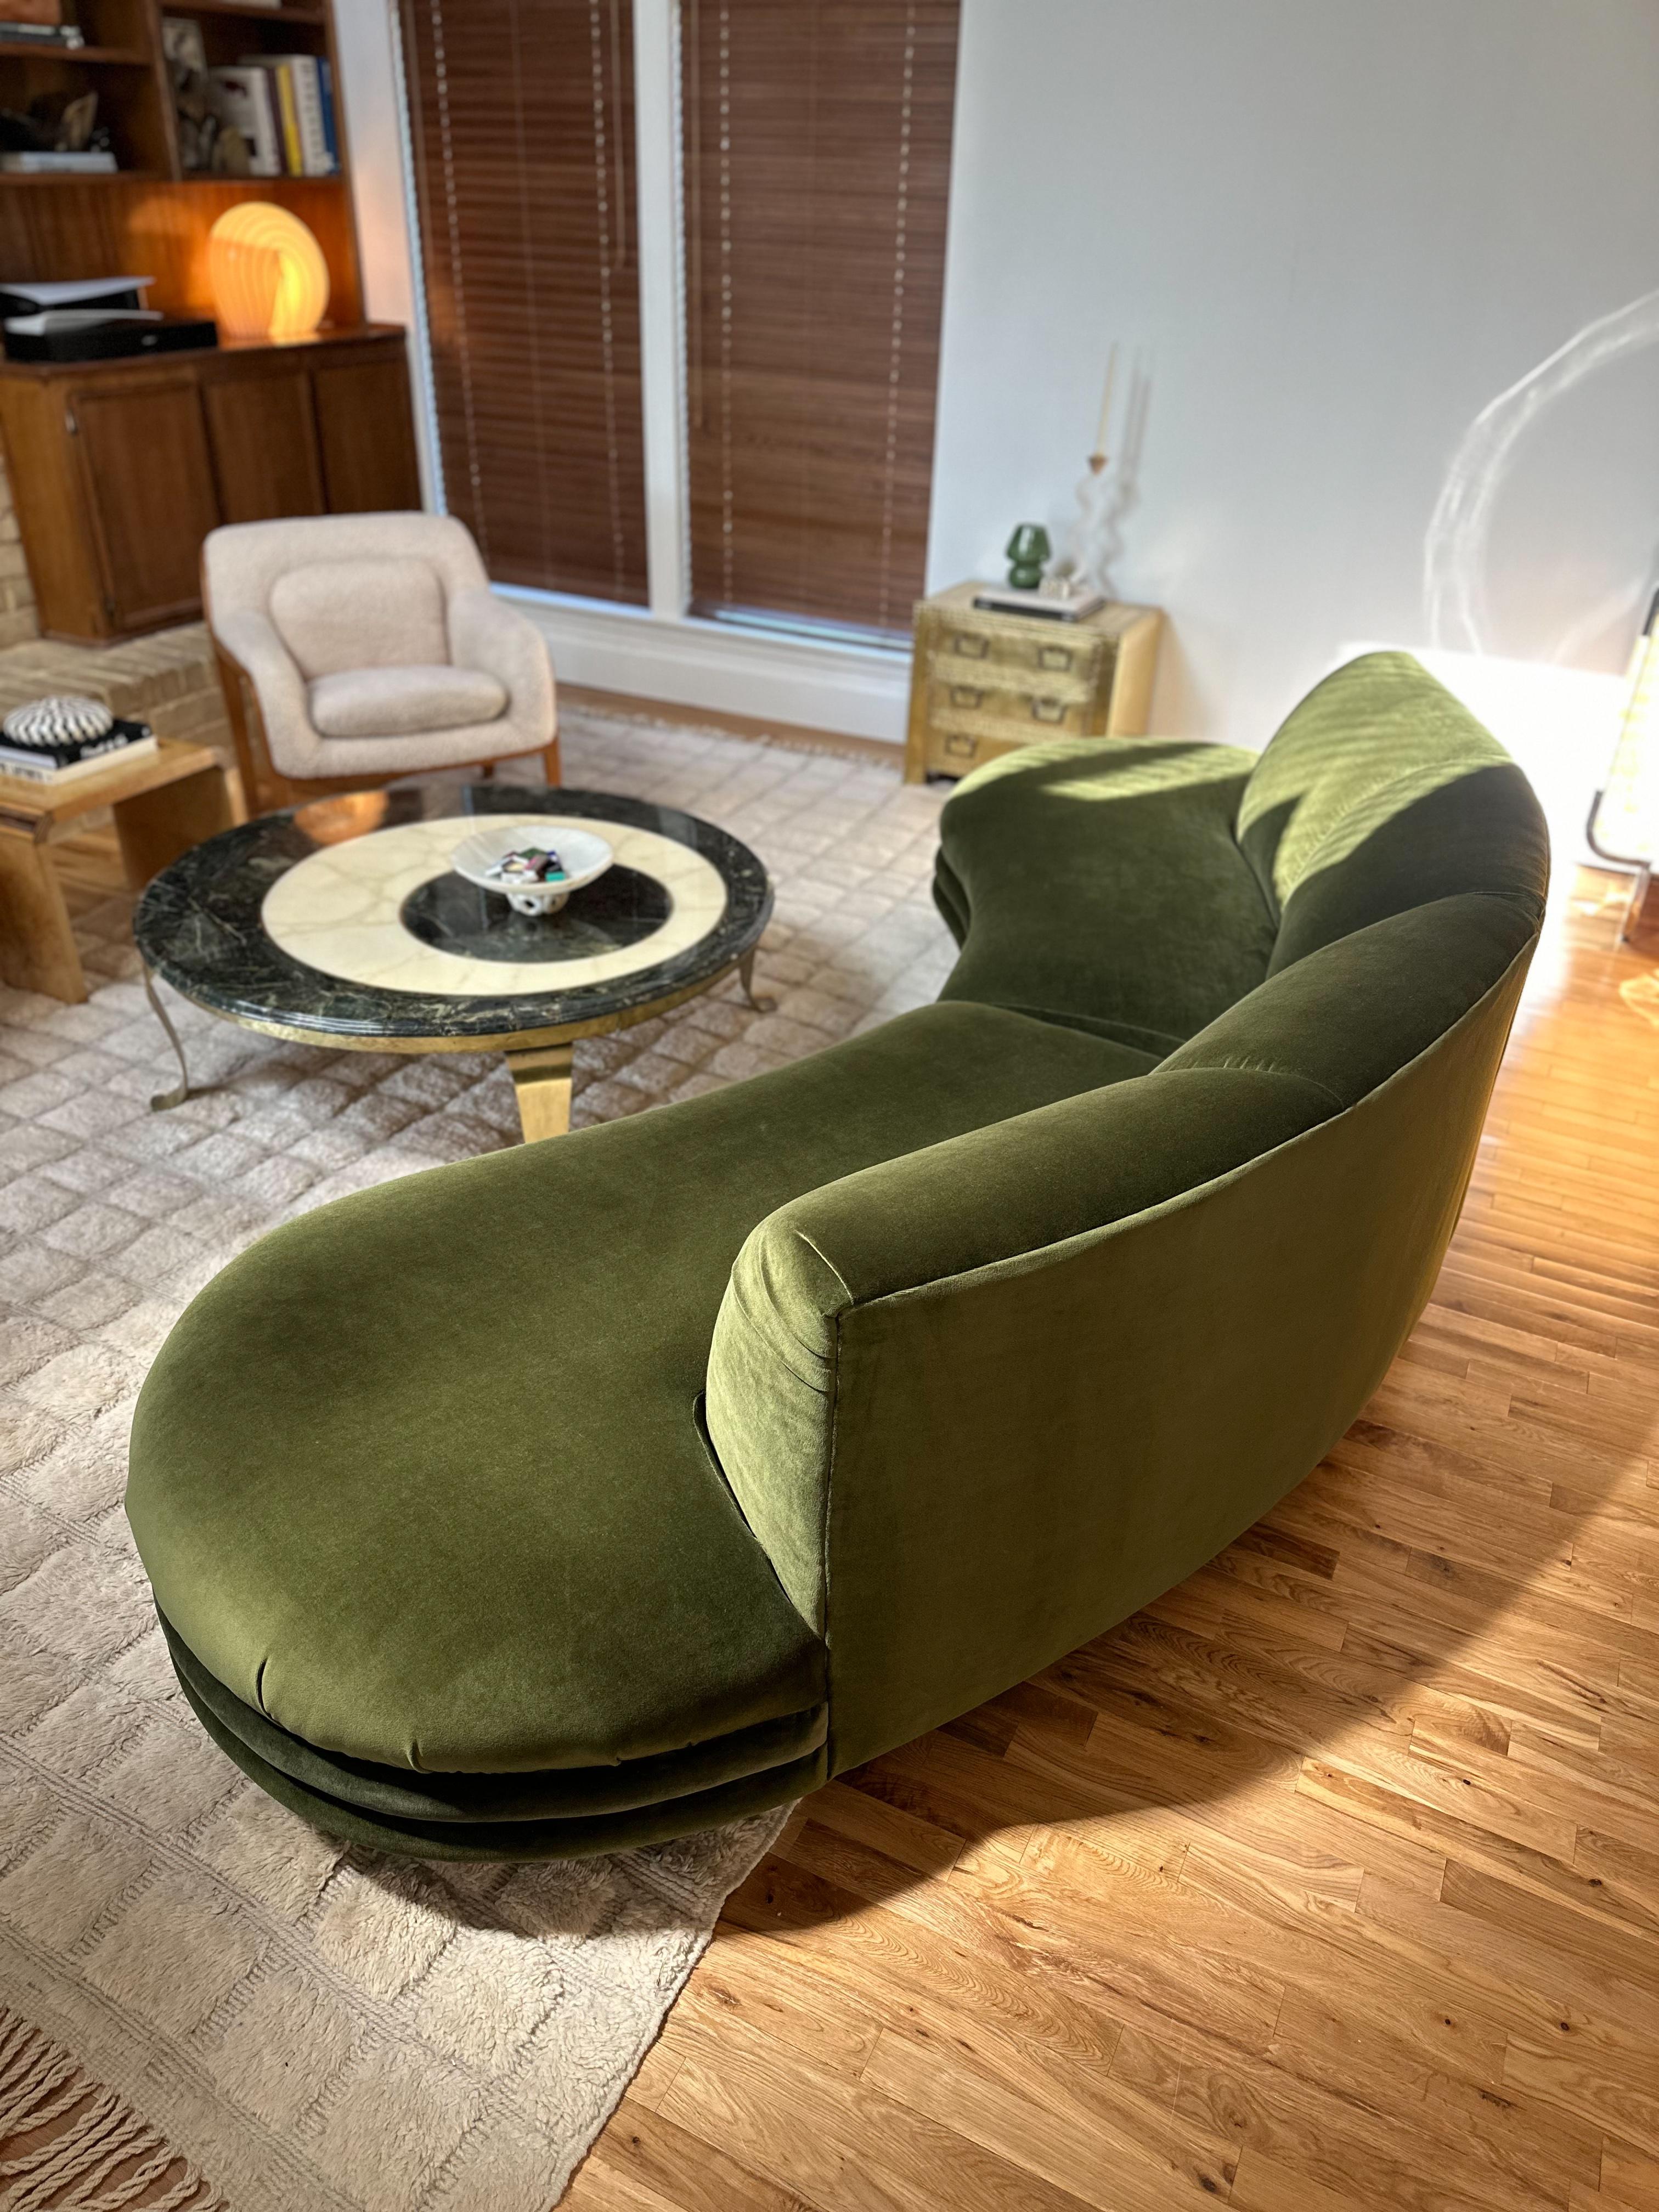 Gorgeous postmodern two piece curved sectional freshly reupholstered in olive velvet, c.1980s. While unmarked, the design is very reminiscent of those by Bernhardt Flair Division and Adrian Pearsall. With its upholstered plinth base, scalloped front